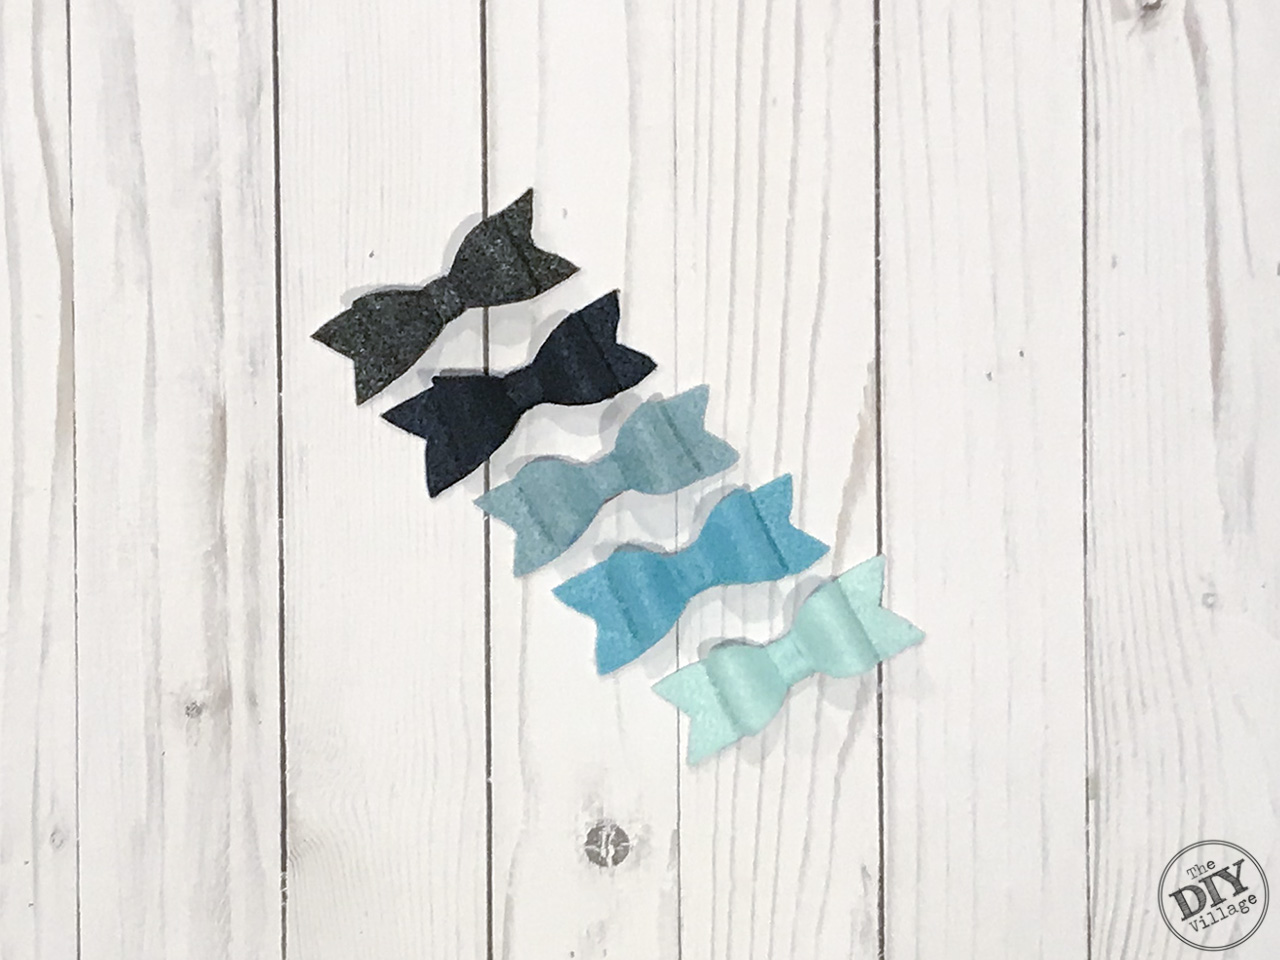 Small felt bows in shades of blues and grays